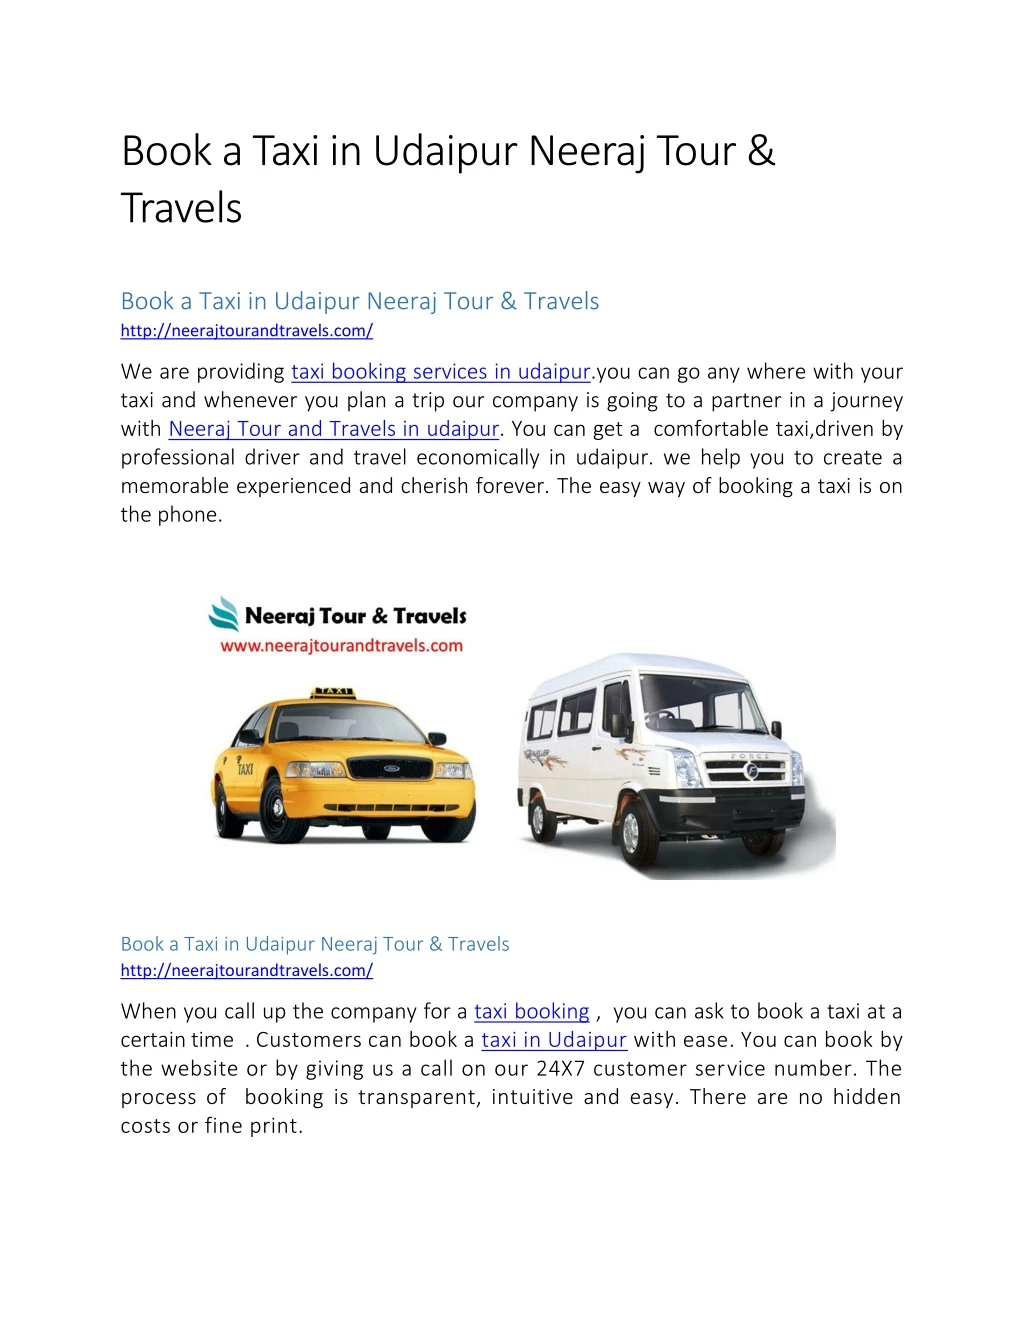 book a taxi in udaipur neeraj tour travels